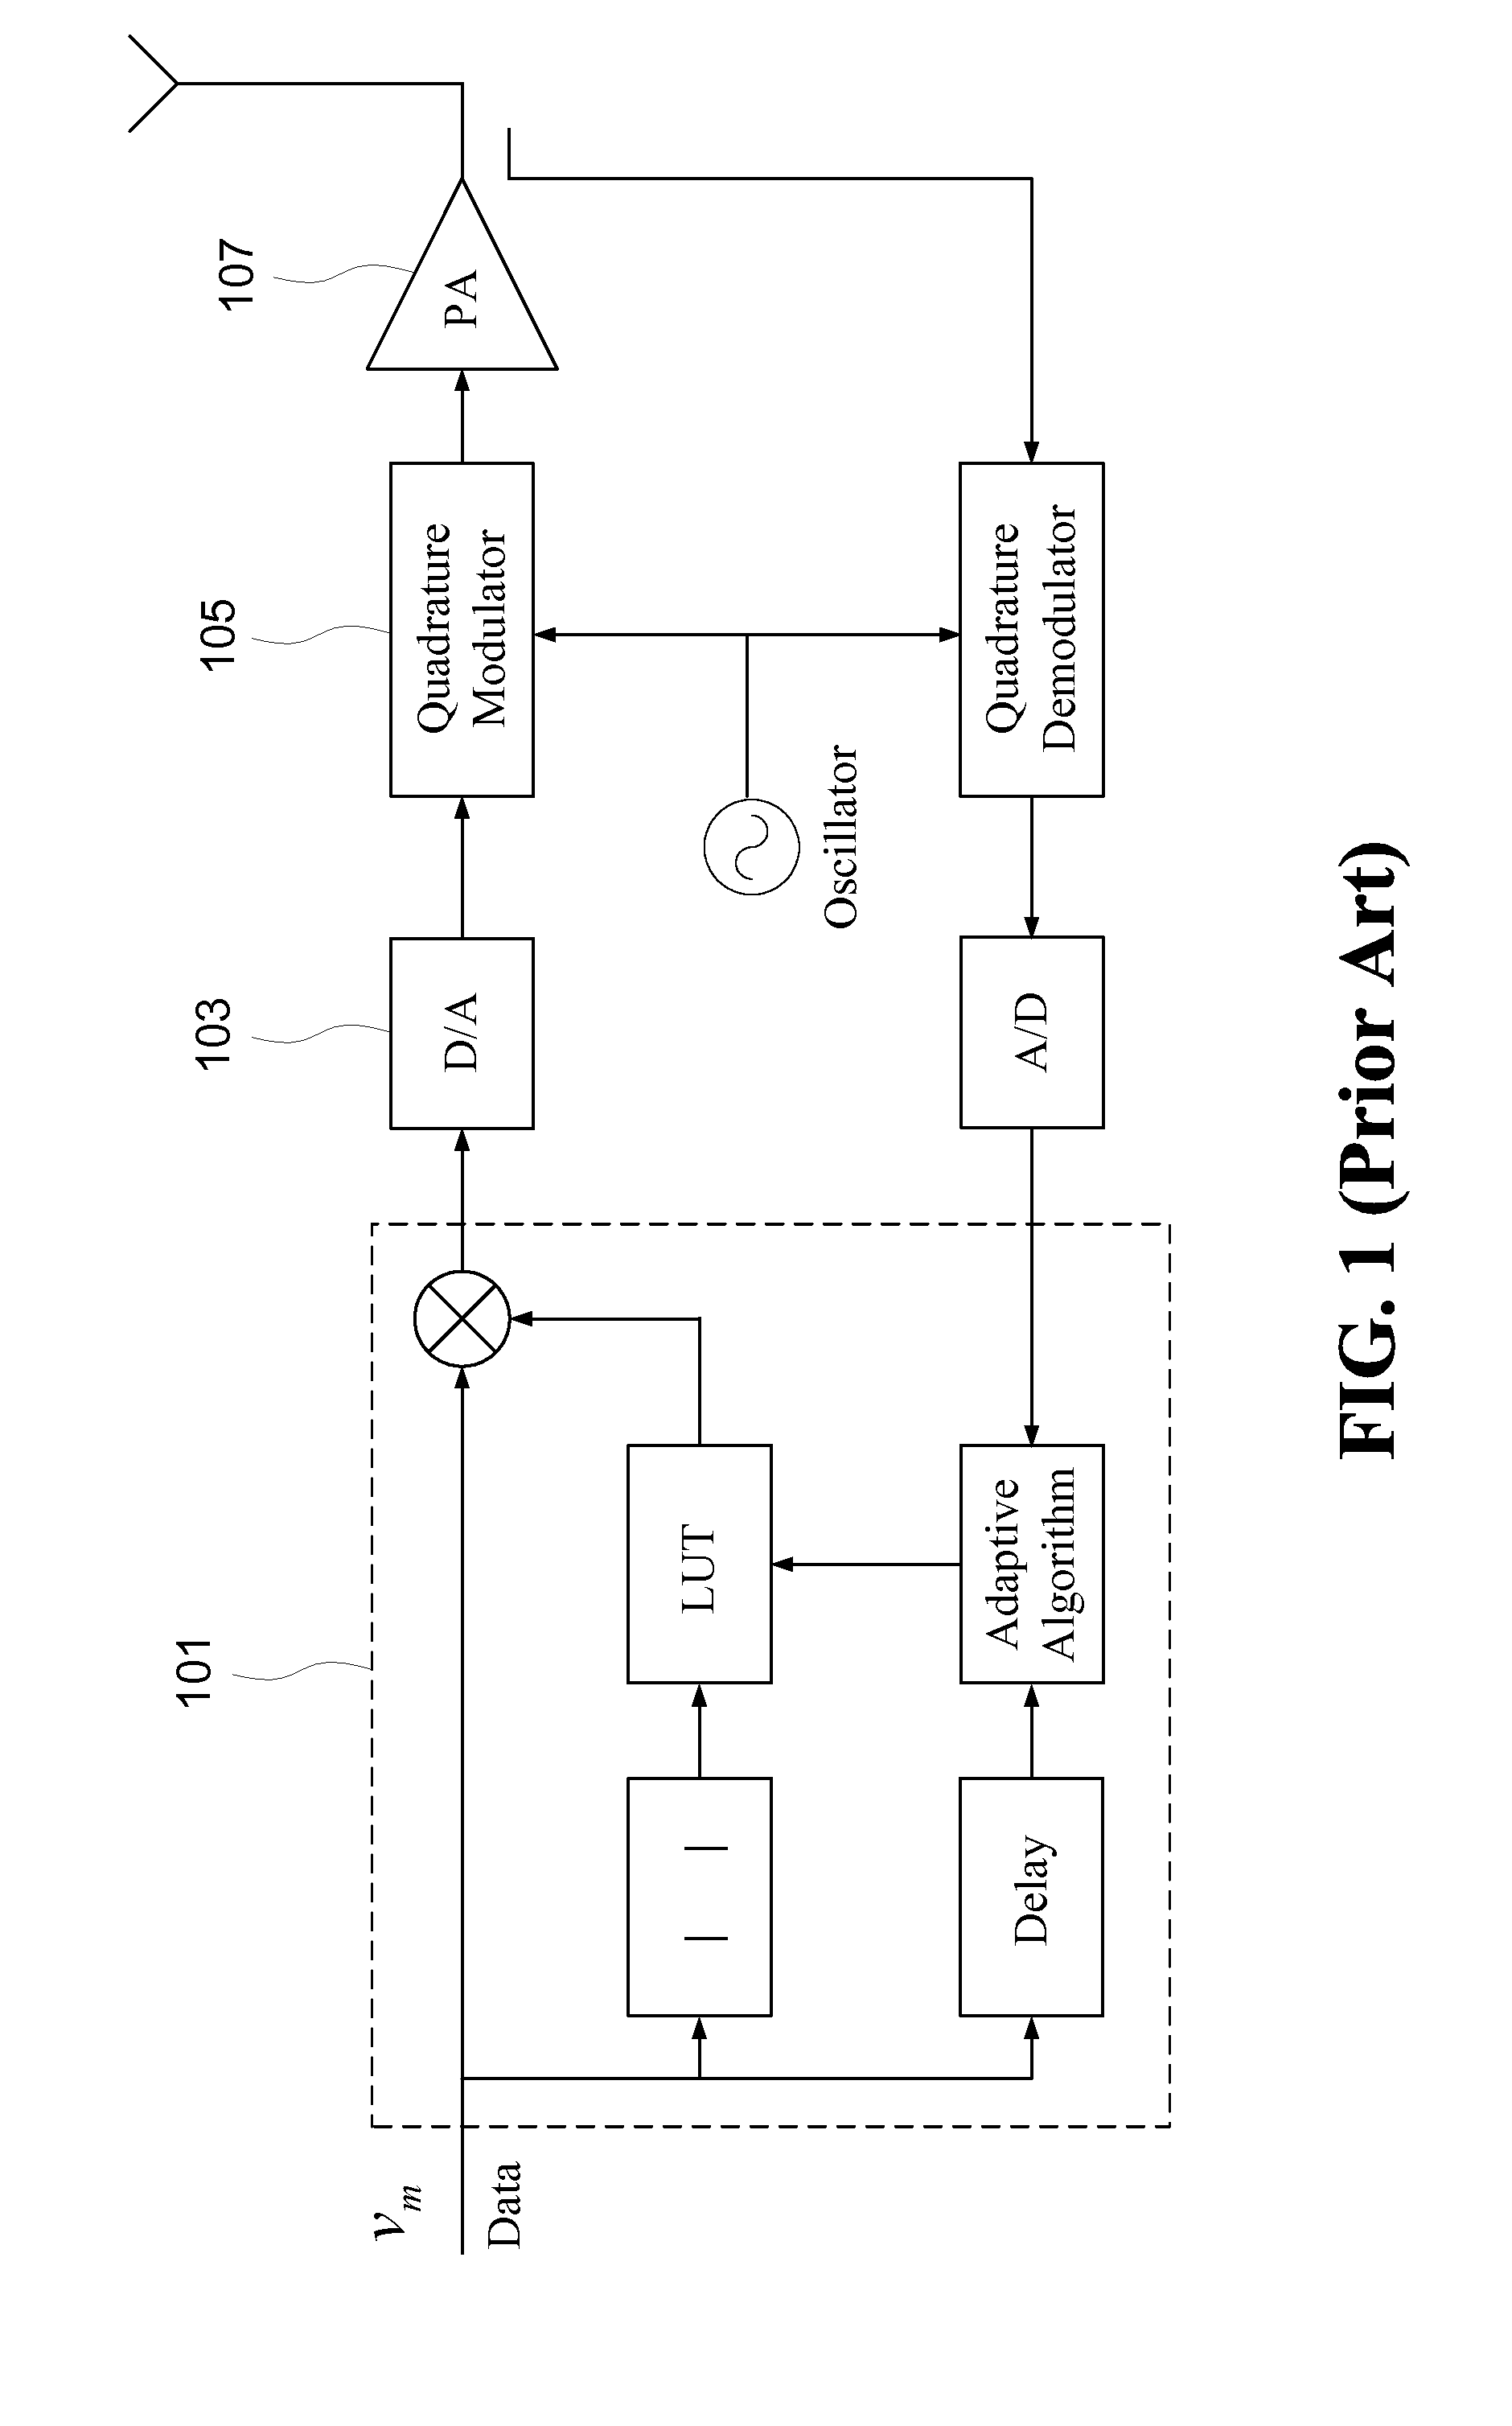 Apparatus And Method Of Dynamically Adapting The LUT Spacing For Linearizing A Power Amplifier